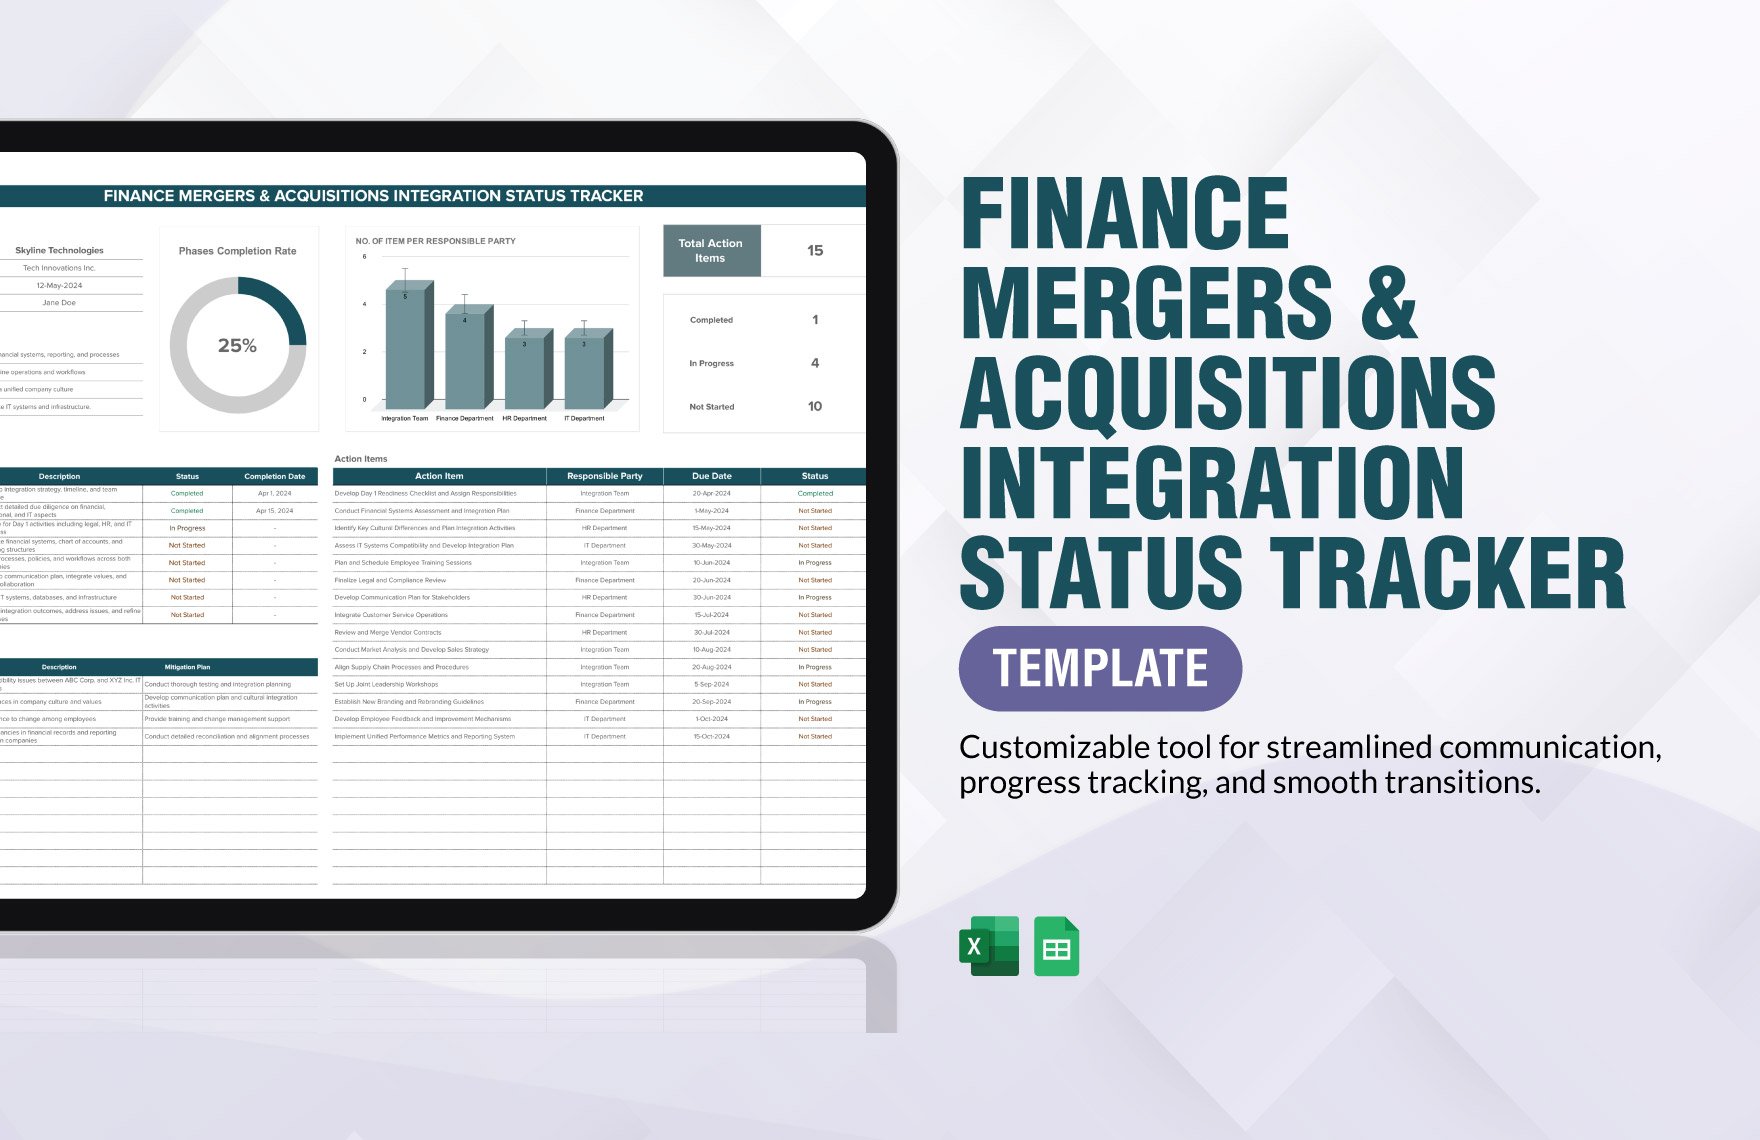 Finance Mergers & Acquisitions Integration Status Tracker Template